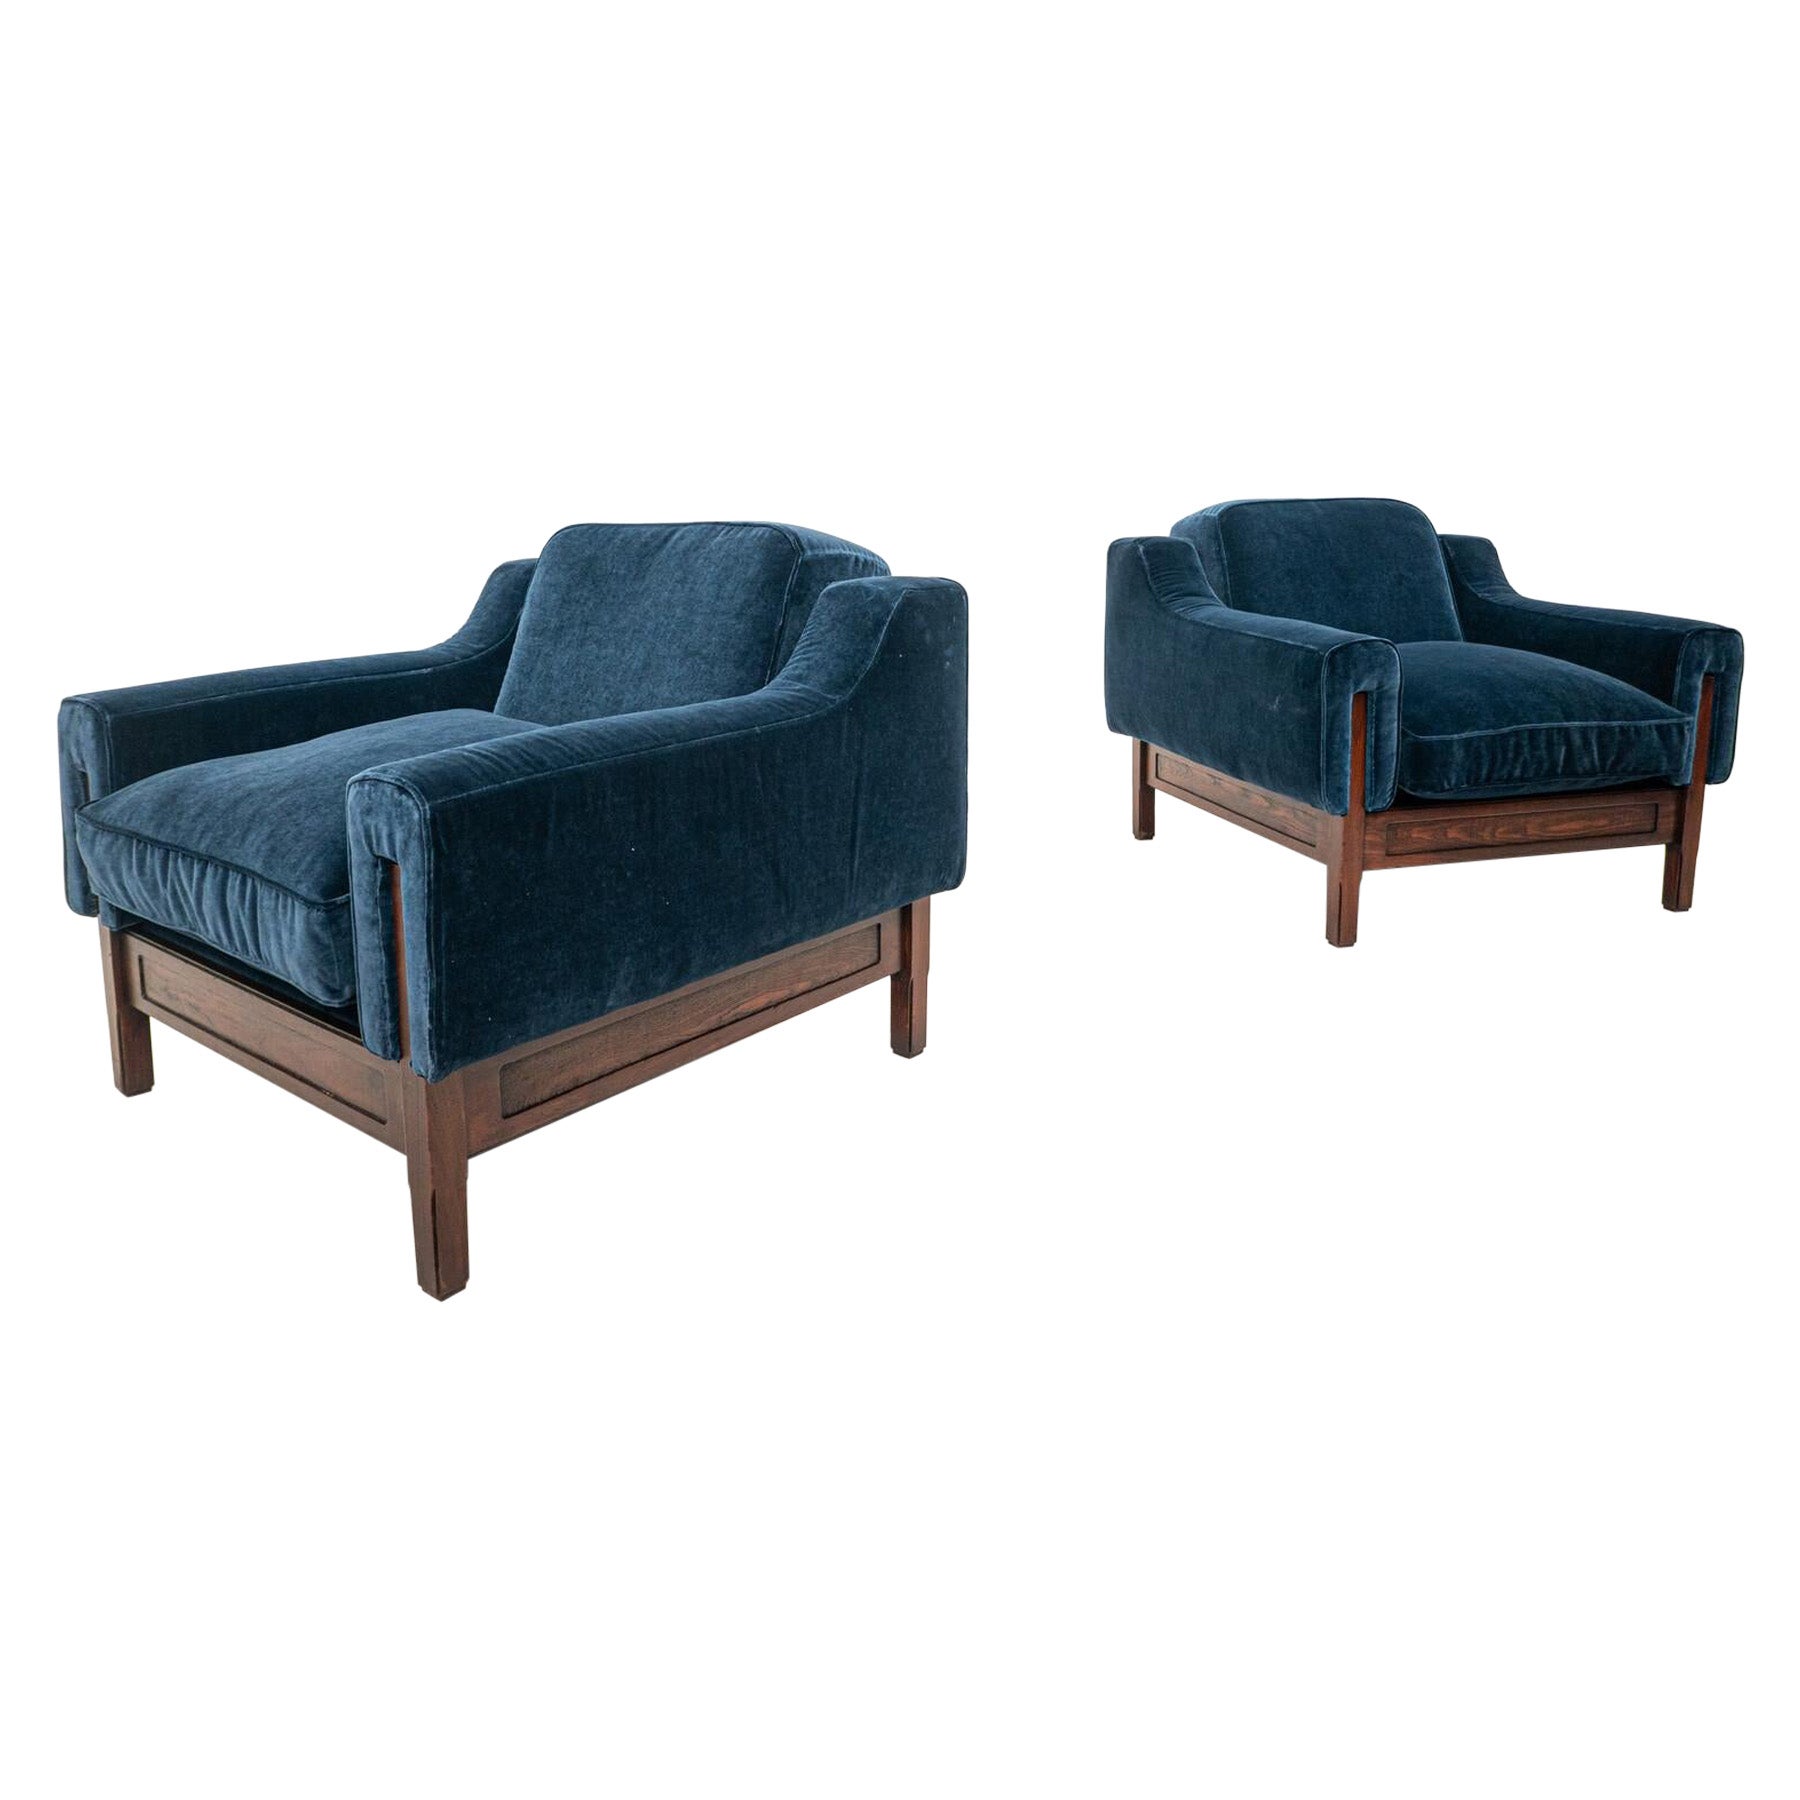 Mid-Century Modern Italian Pair of Amrchairs, Wood and Blue Velvet, 1960s For Sale